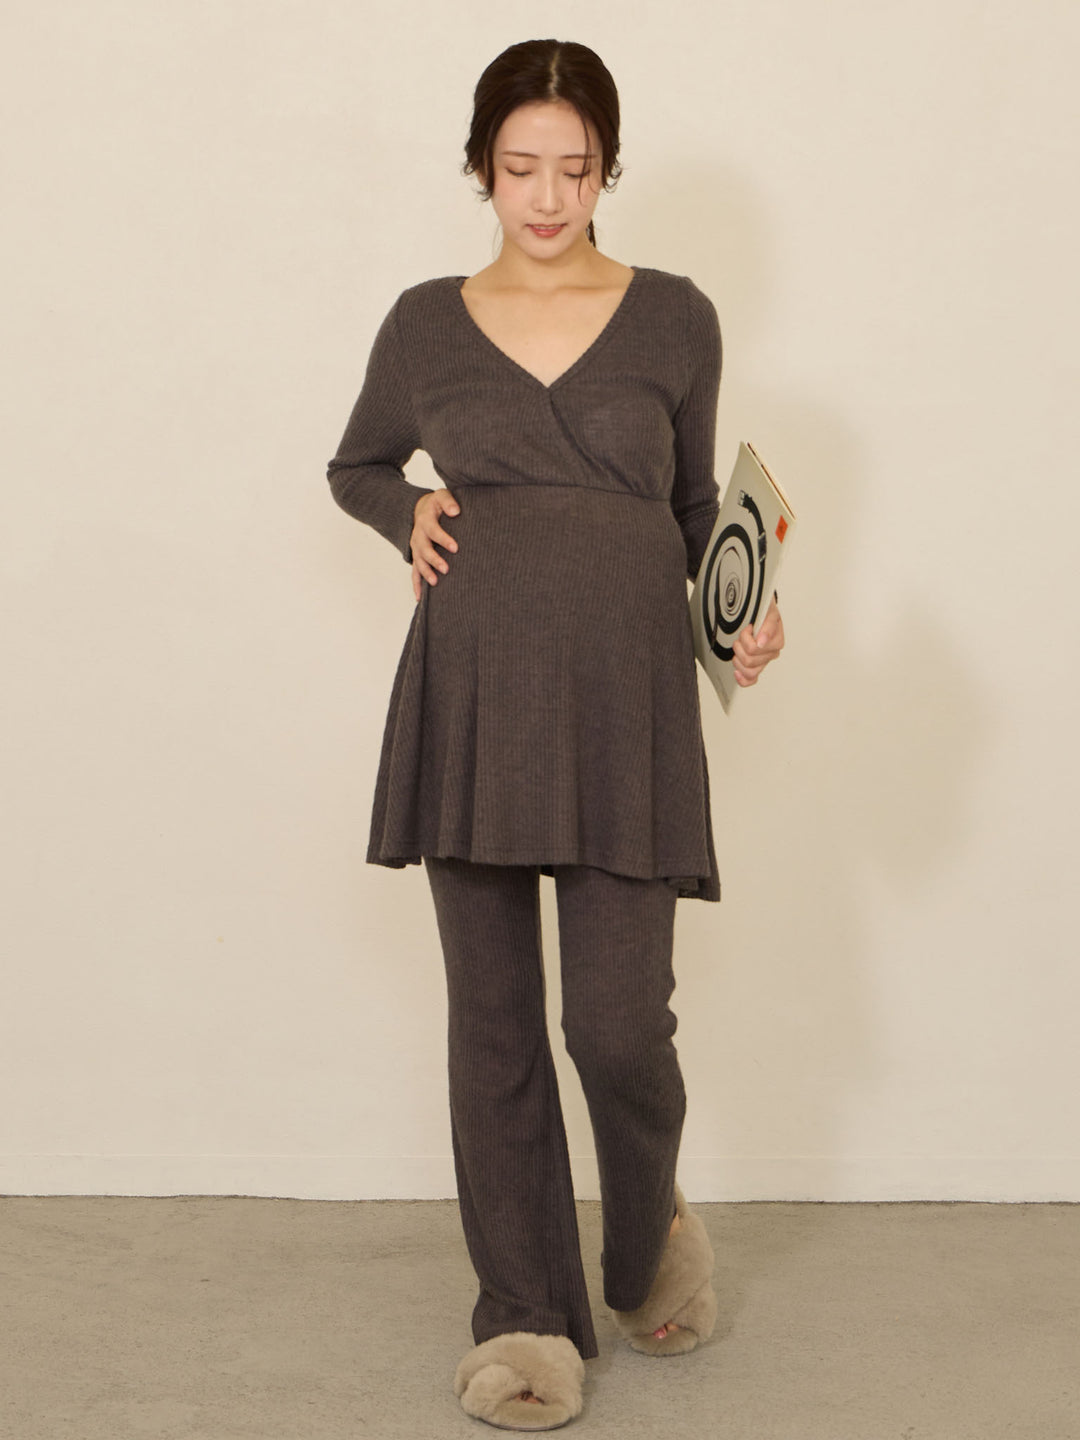 [Maternity/Nursing Clothes] Room tops with cups that stay in place Charcoal Gray